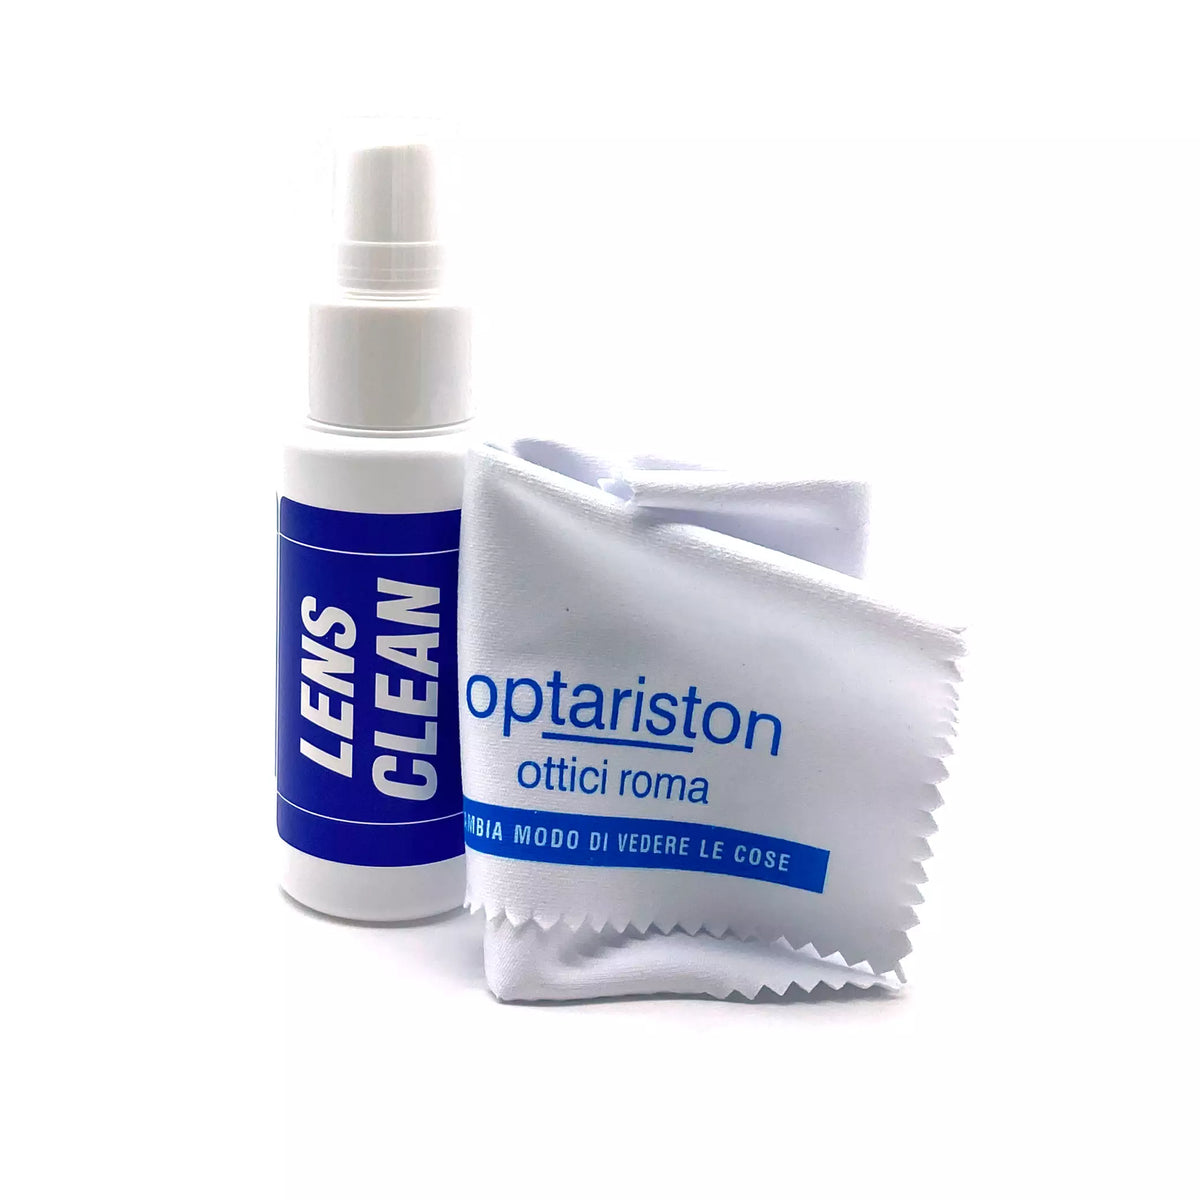 Lens Clean - Ophthalmic Lens Cleaner